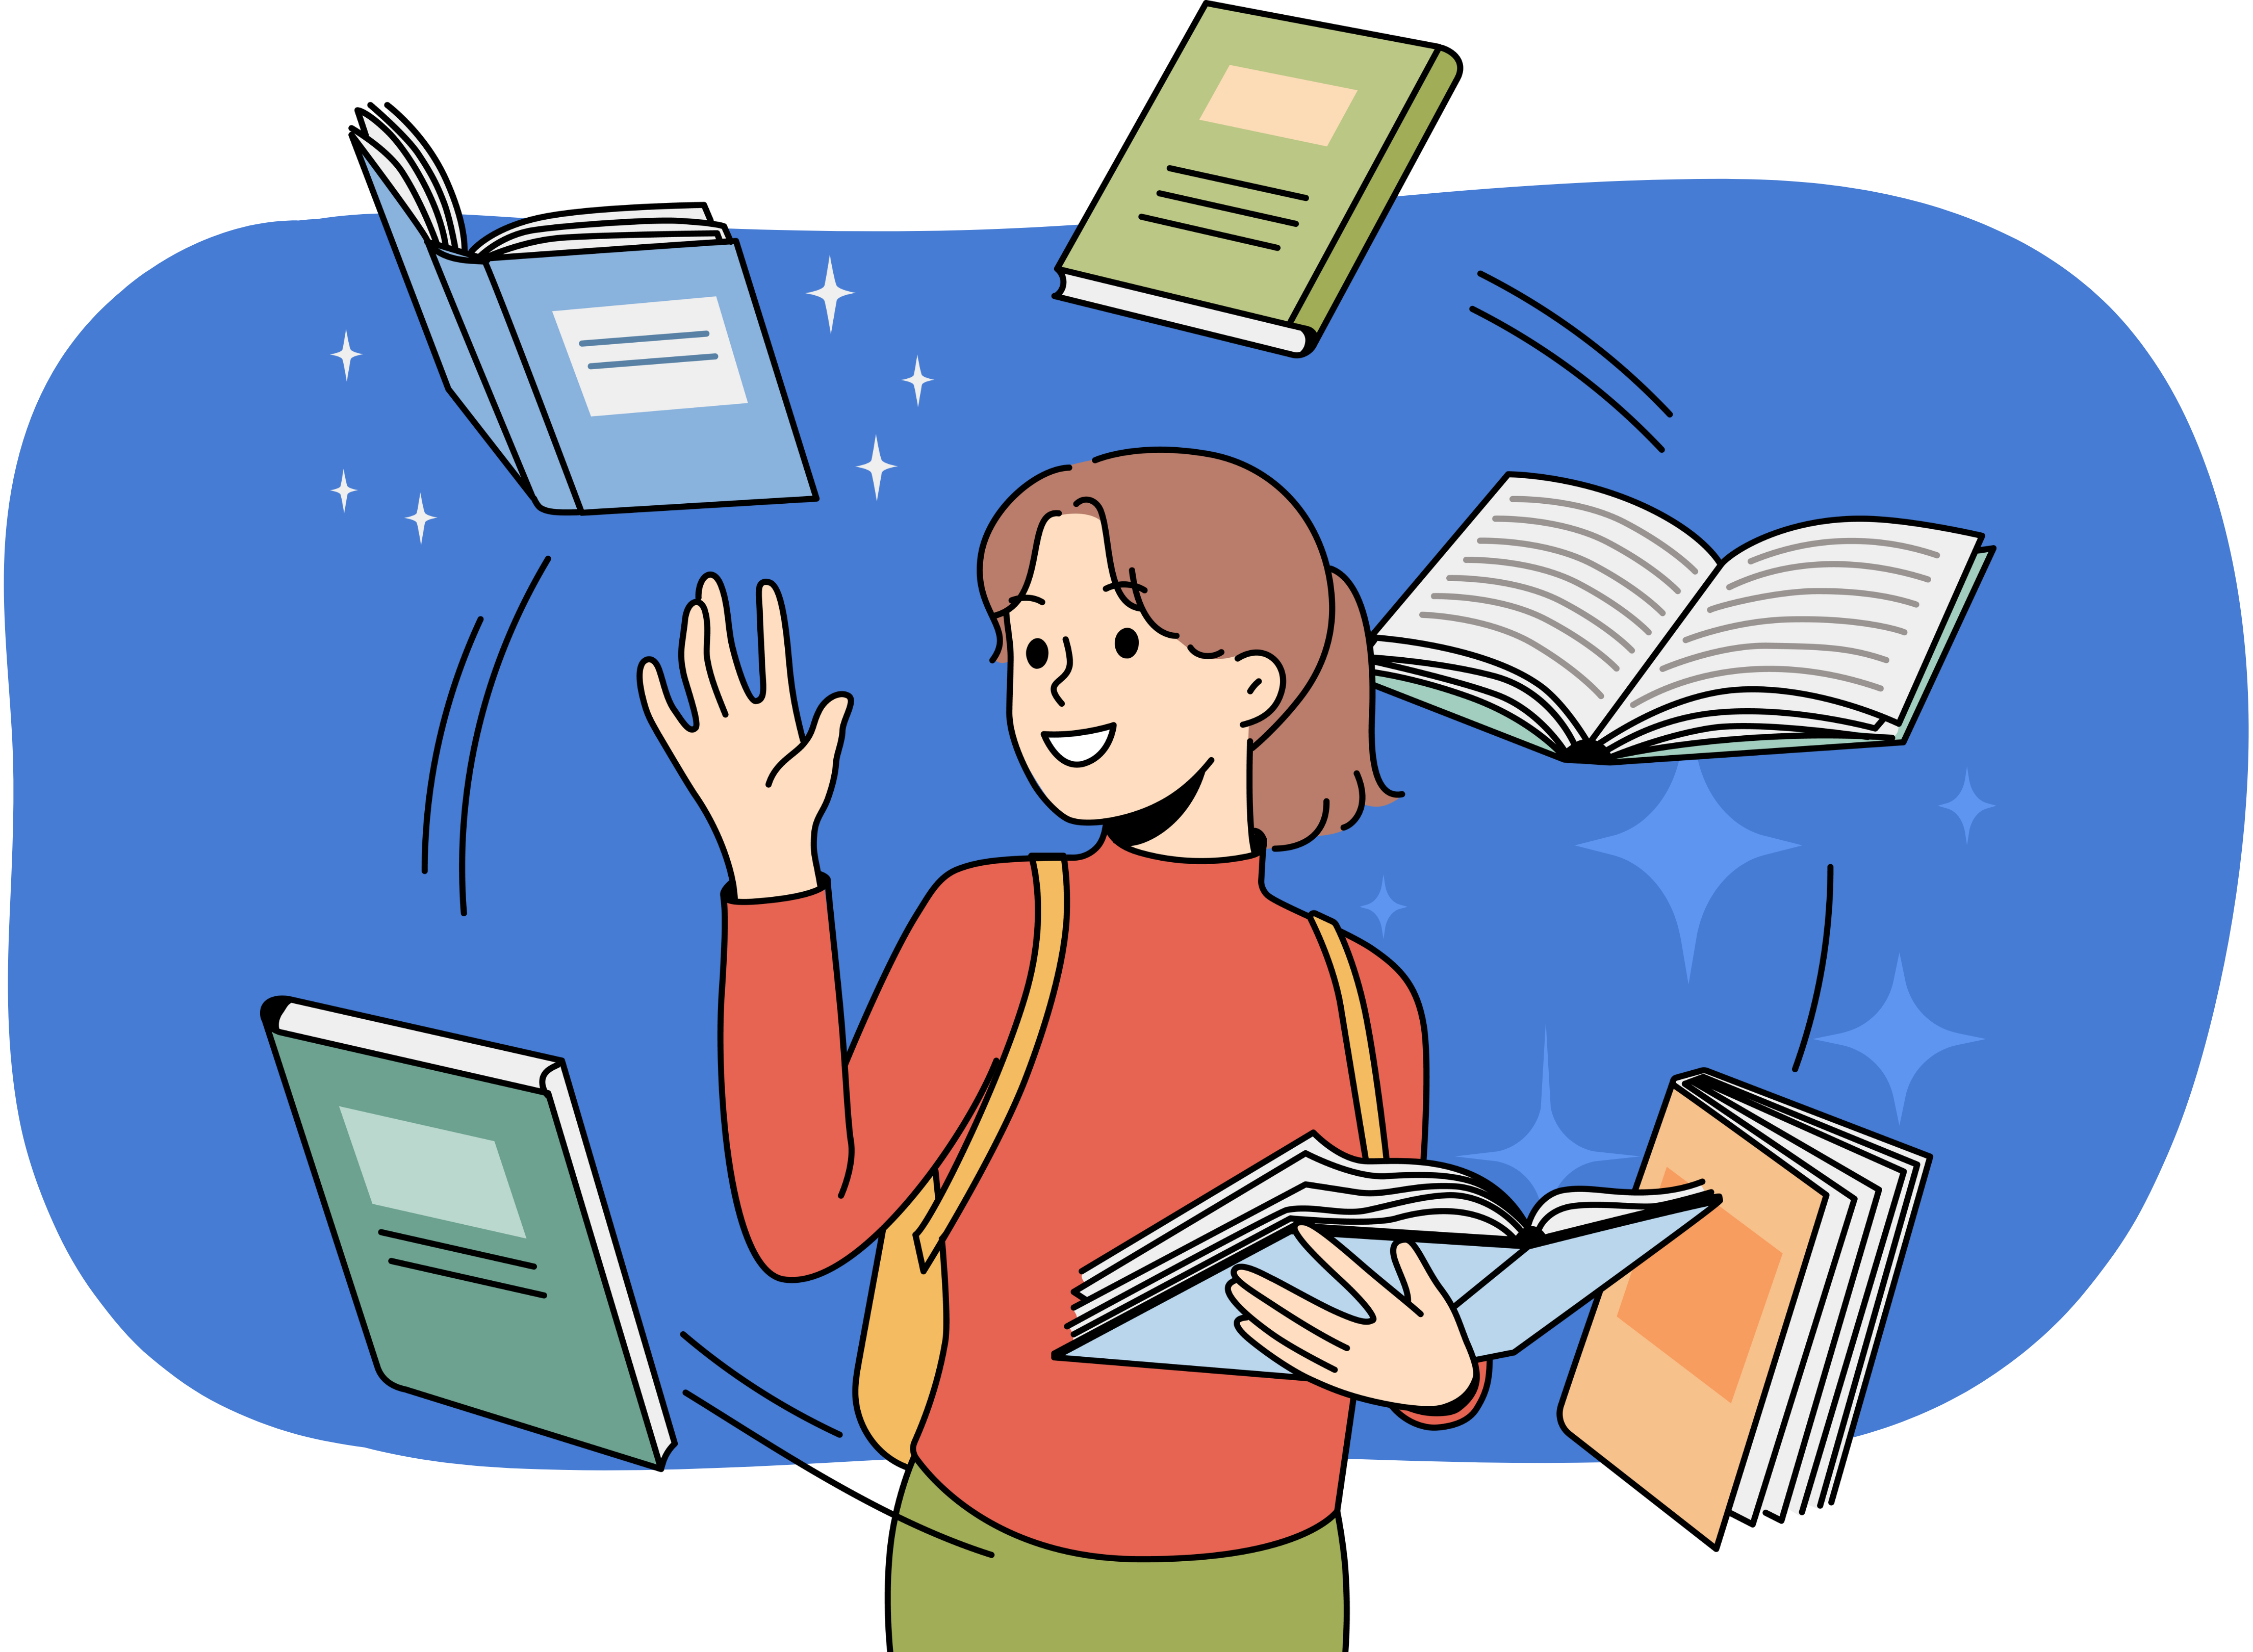 A colorful illustration of a feminine student with books. The student holding an open book in one hand while raising their hand towards another floating beside them. Four other books circle them.